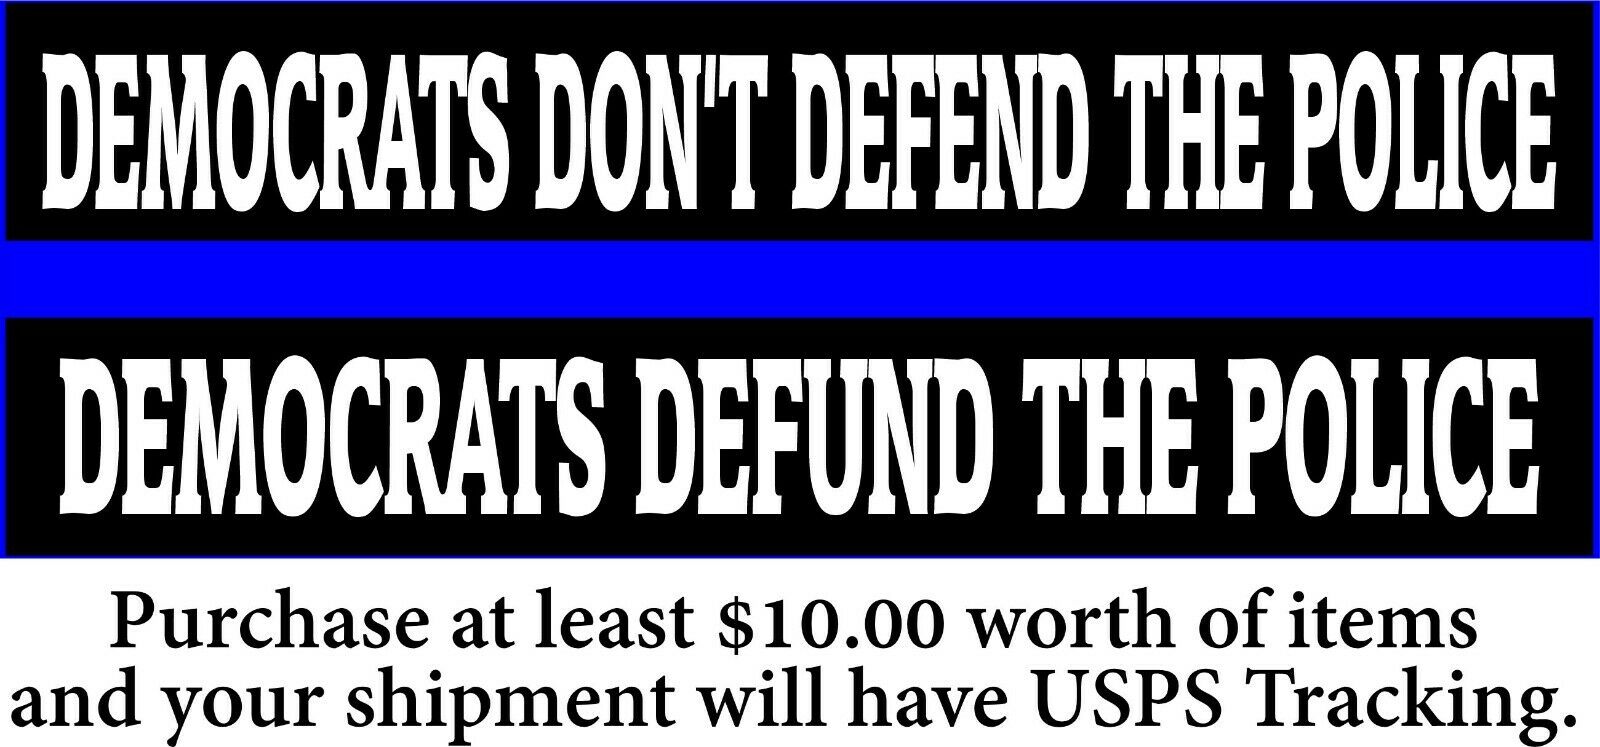 Democrats Don't defend the police hey defund them bumper sticker - Various Sizes - Powercall Sirens LLC